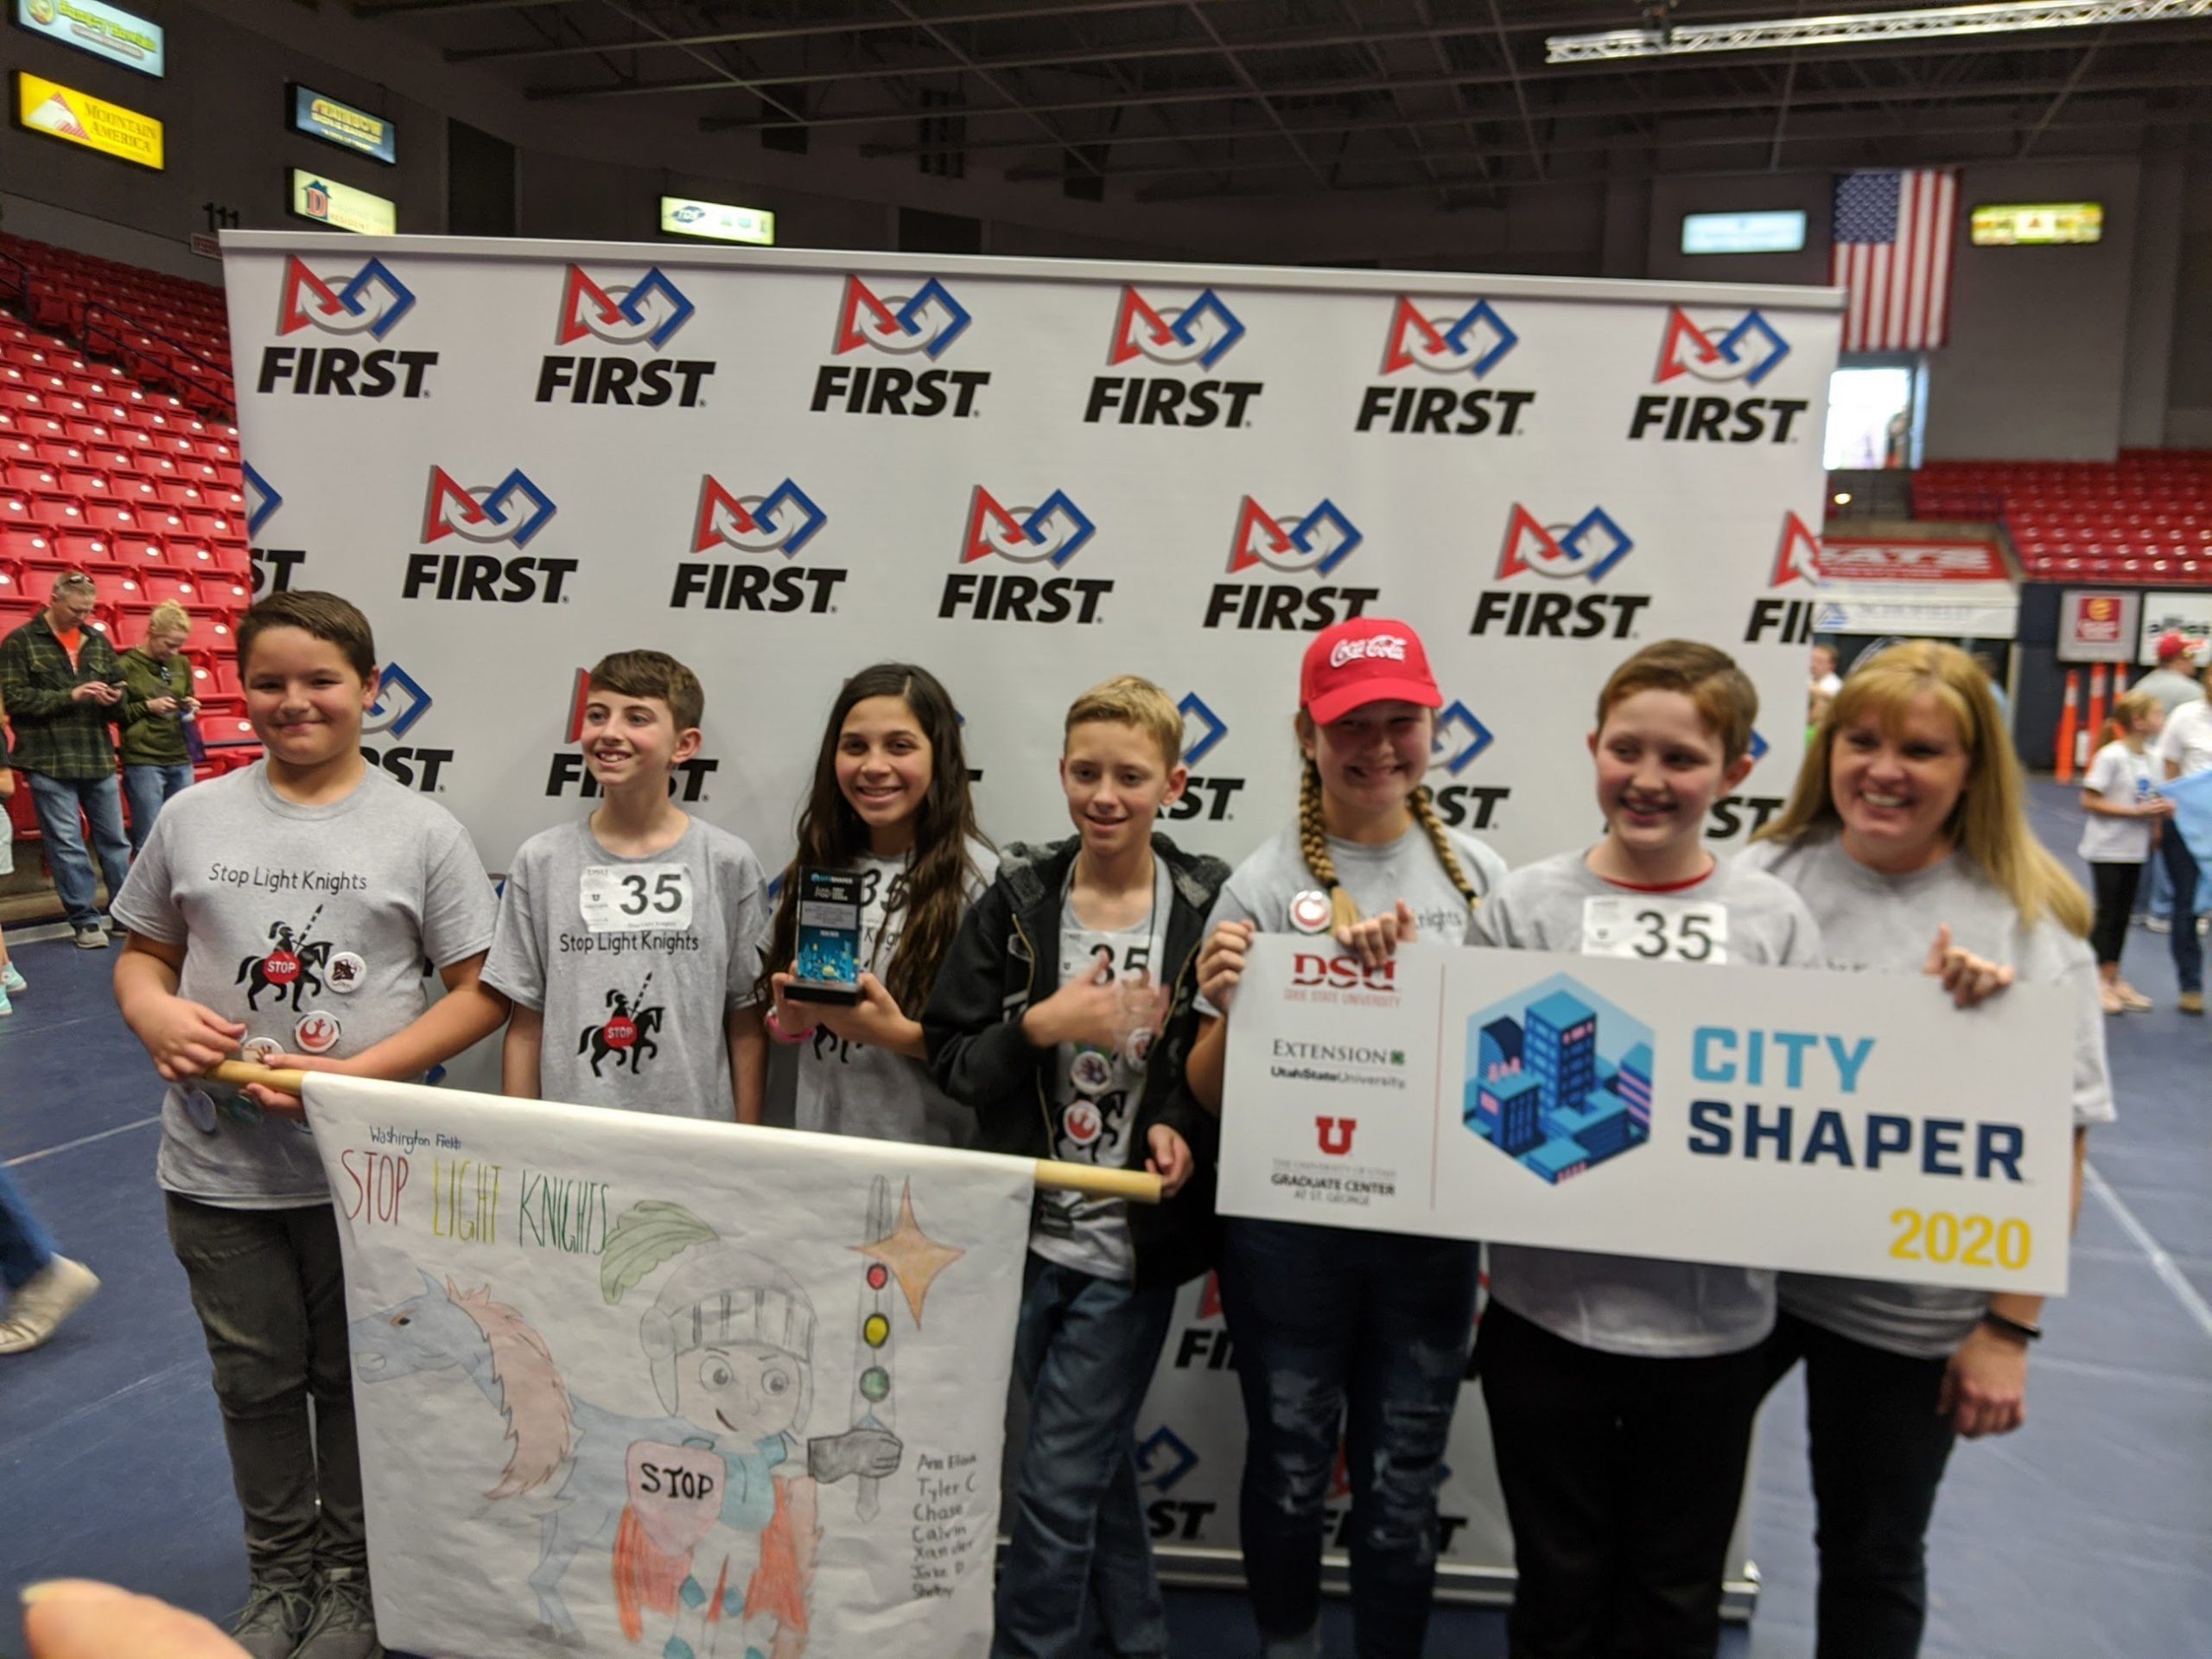 students hold banners for city shaper competition